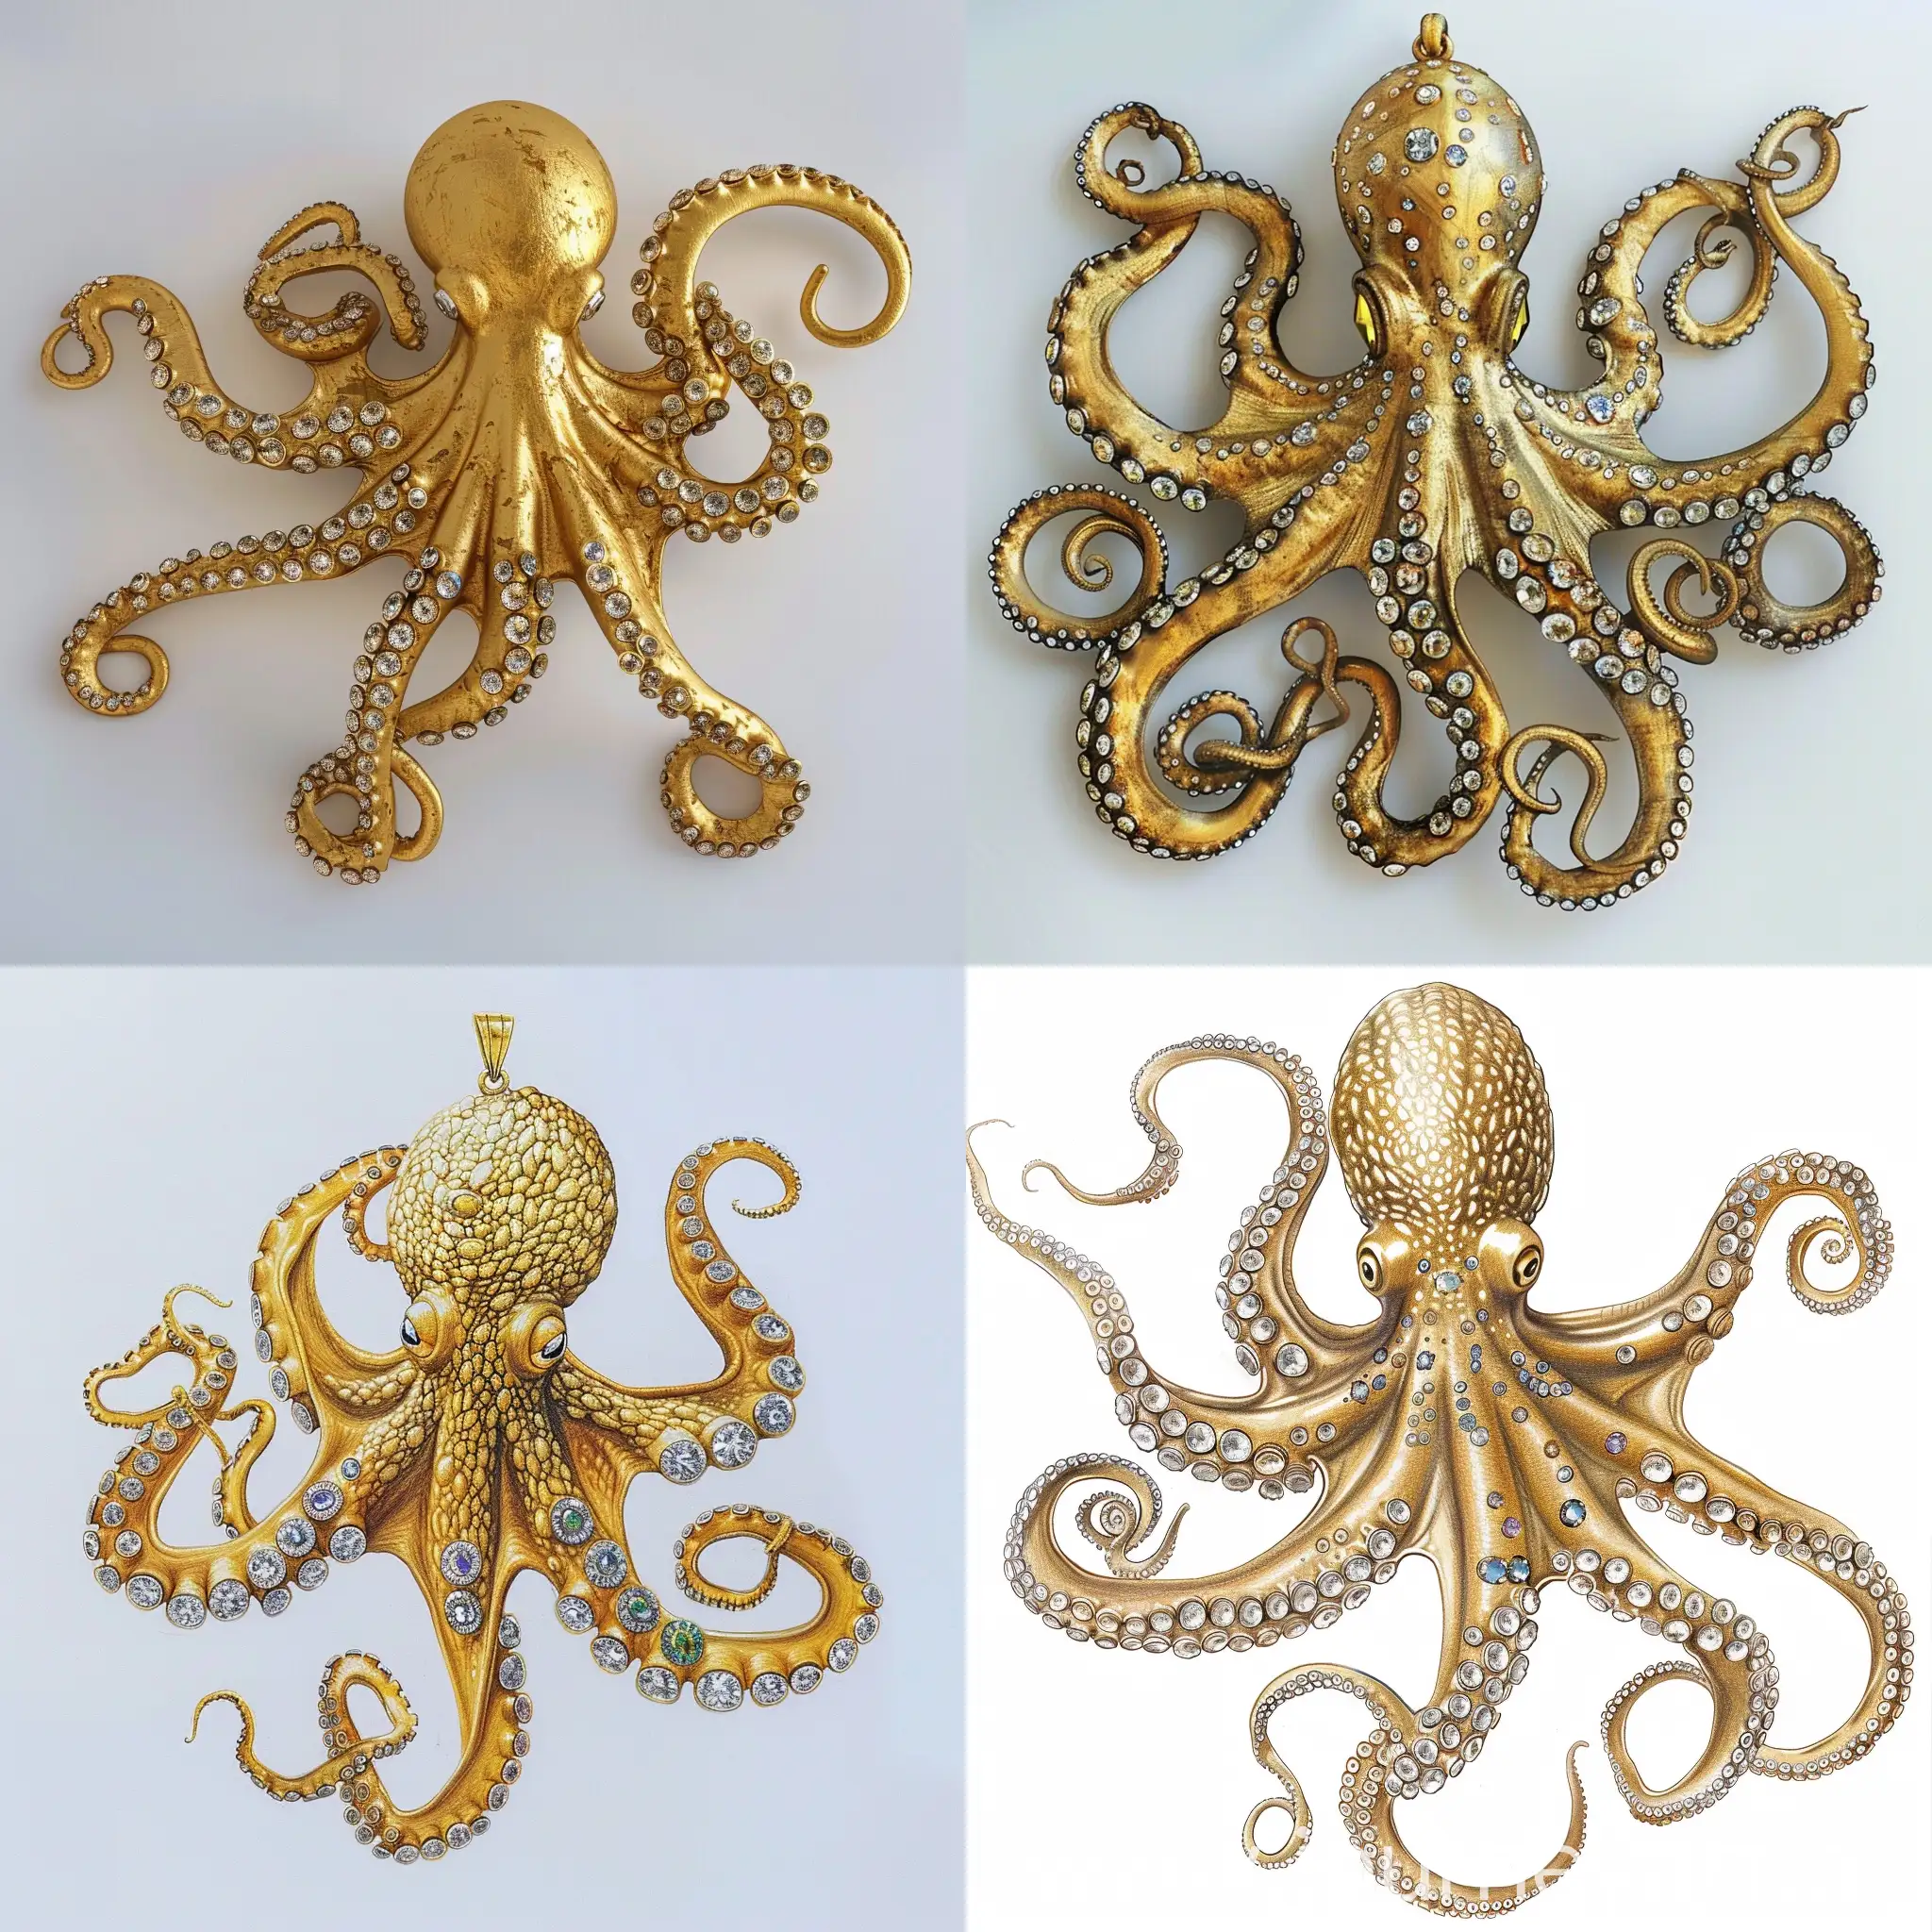 Golden-Octopus-Pendant-with-Jeweled-Arms